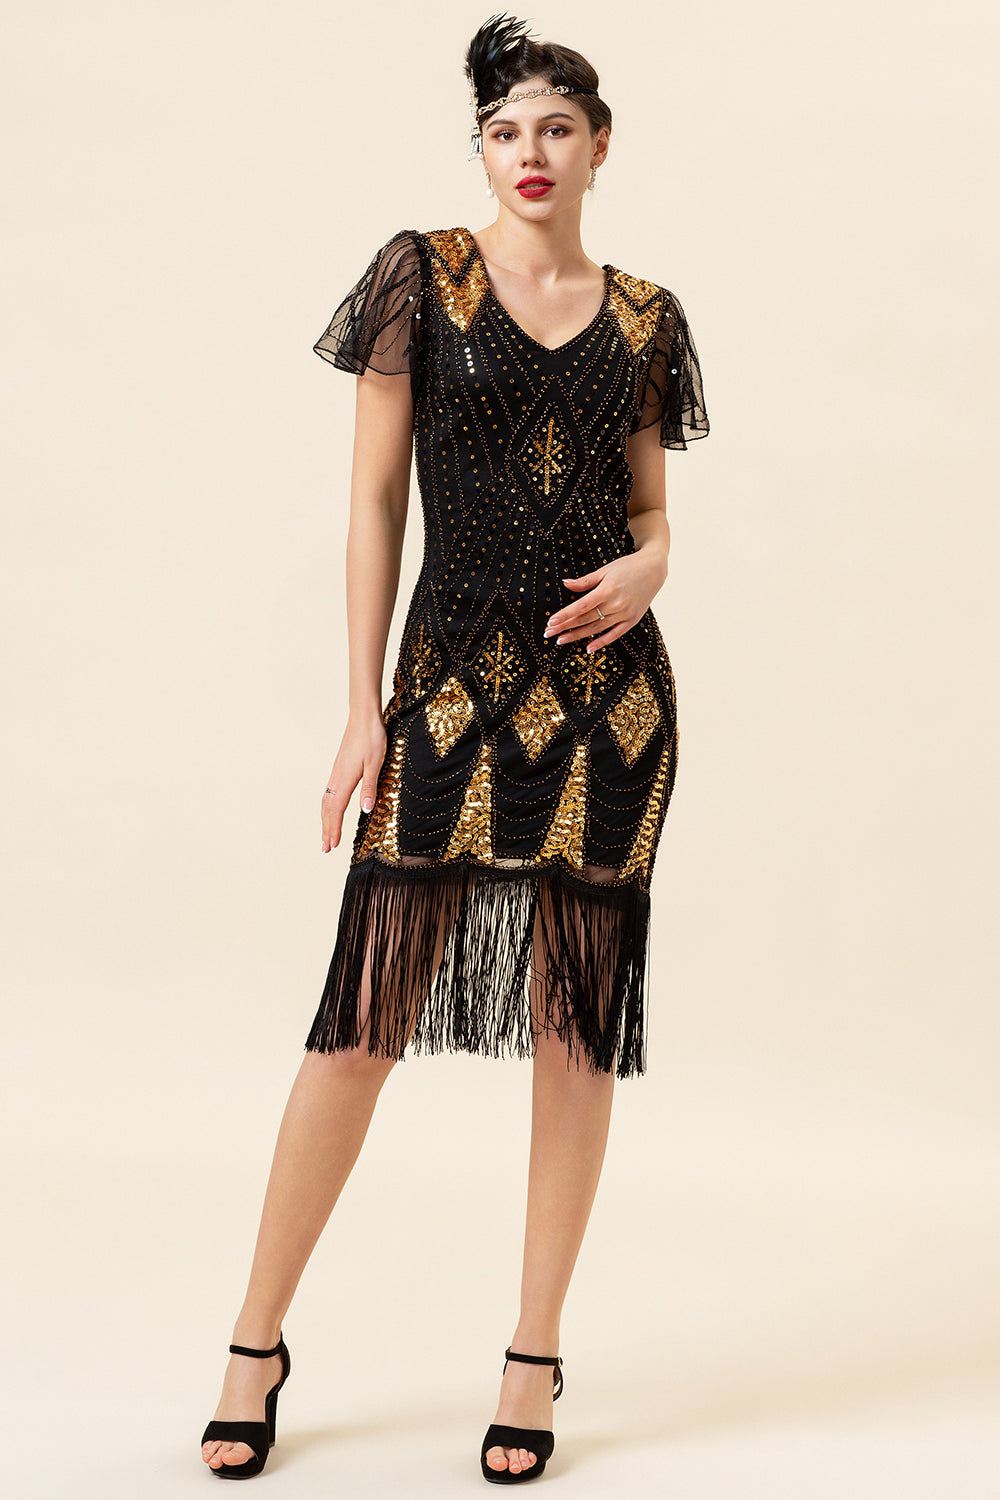 Black and Golden Sequins Fringes 1920s Gatsby Dress with 20s Accessories Set